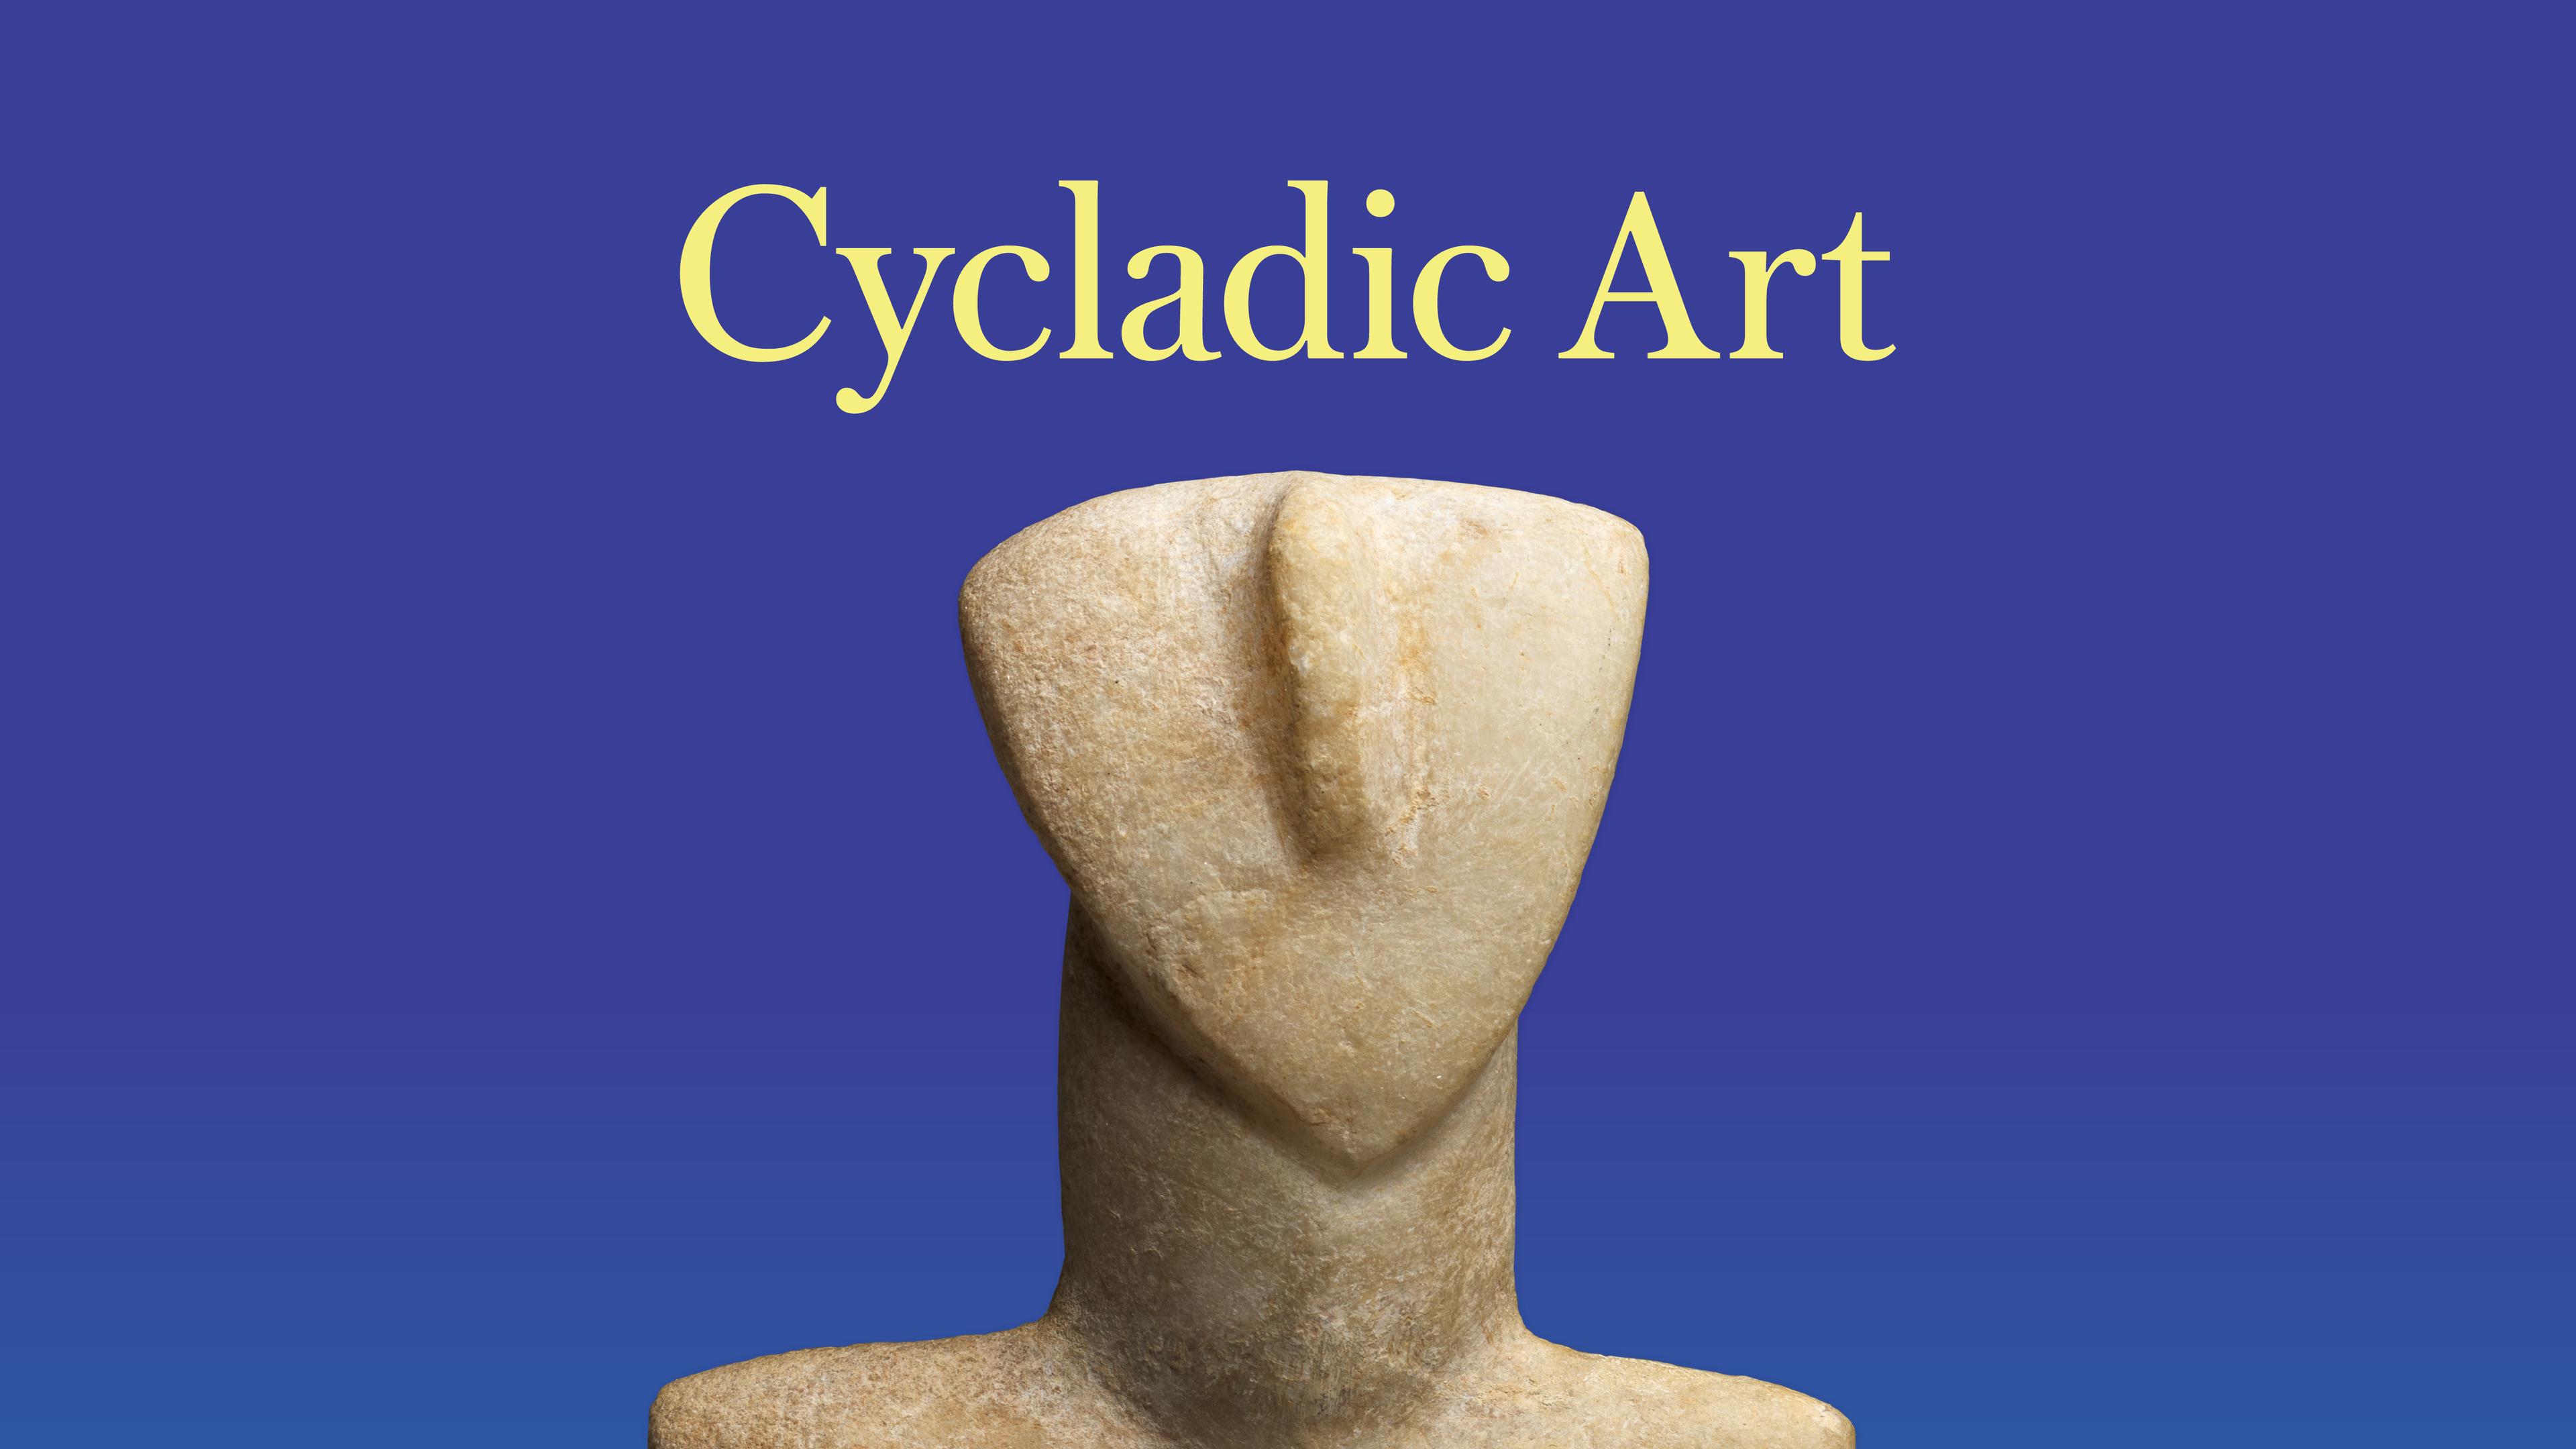 A marble carving of a female figure on a blue background with the words Cycladic Art